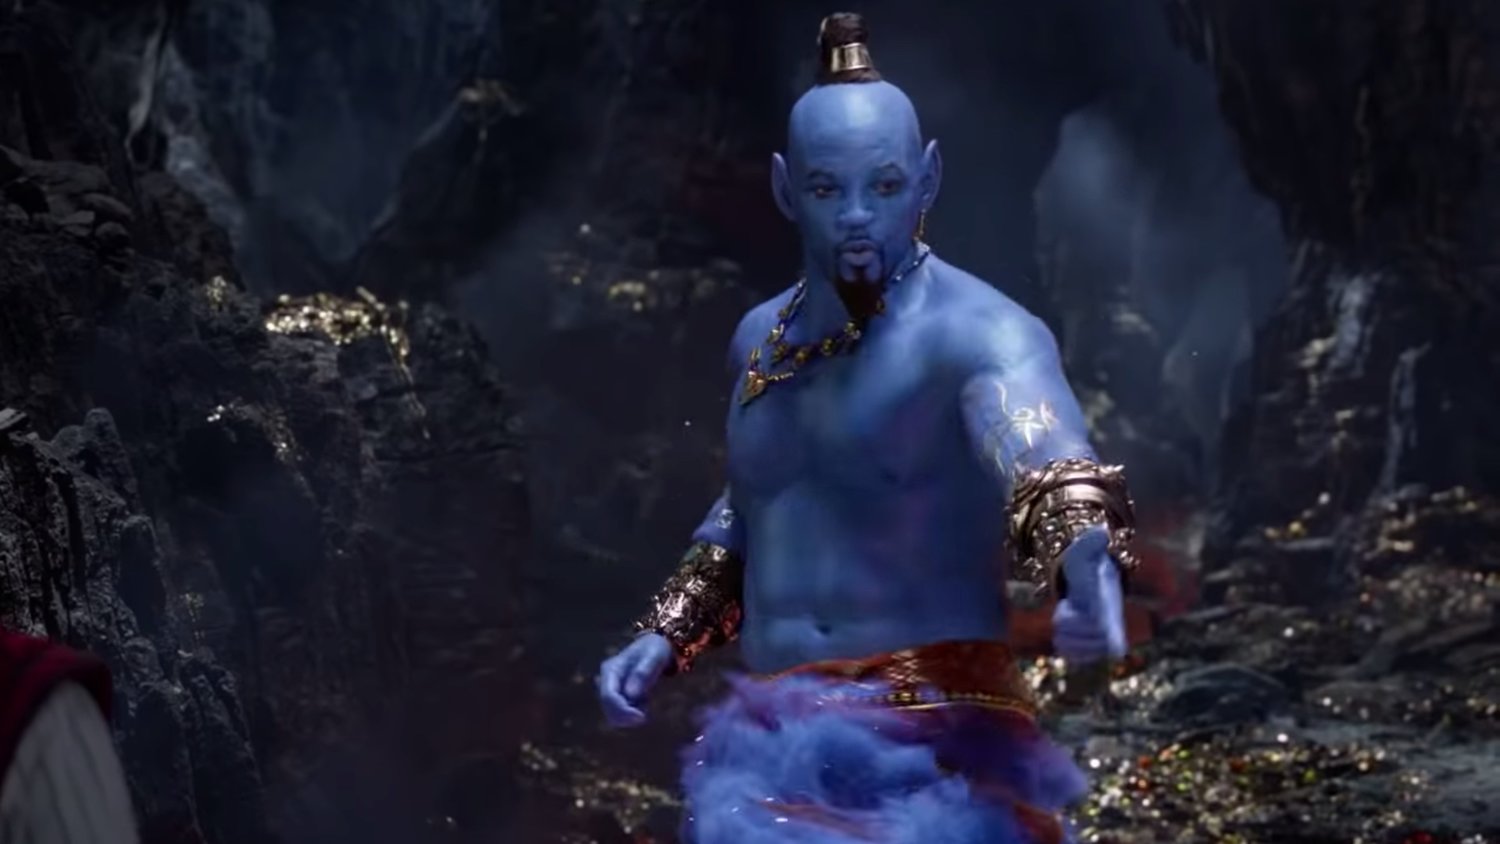 Will Smith Describes Using Old Hip Hop To Get Into Character As The Genie In Aladdin